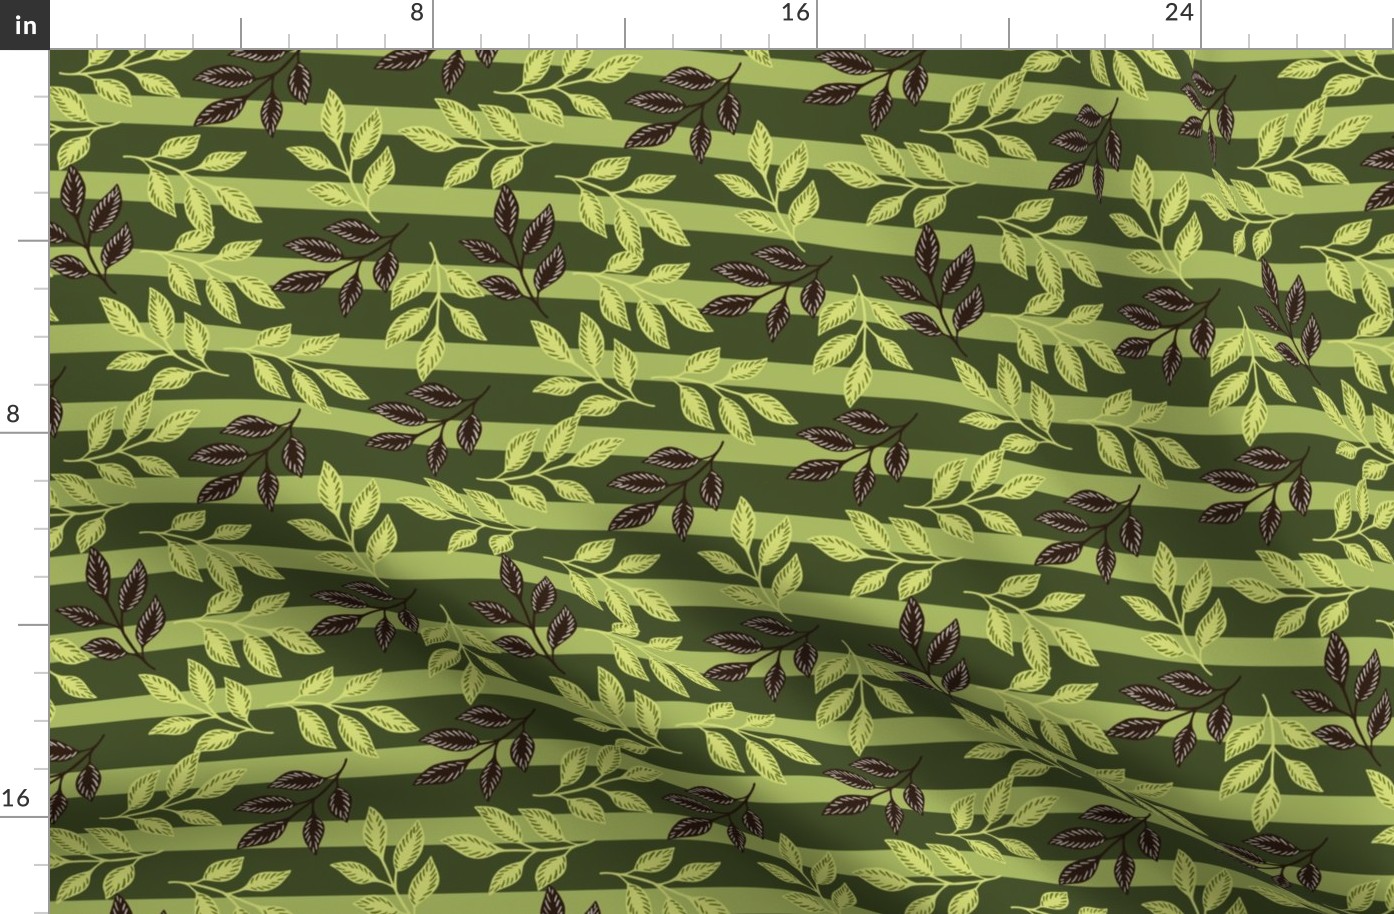 Stylized Leaves in Brown and Light Green on Dark Green Stripe